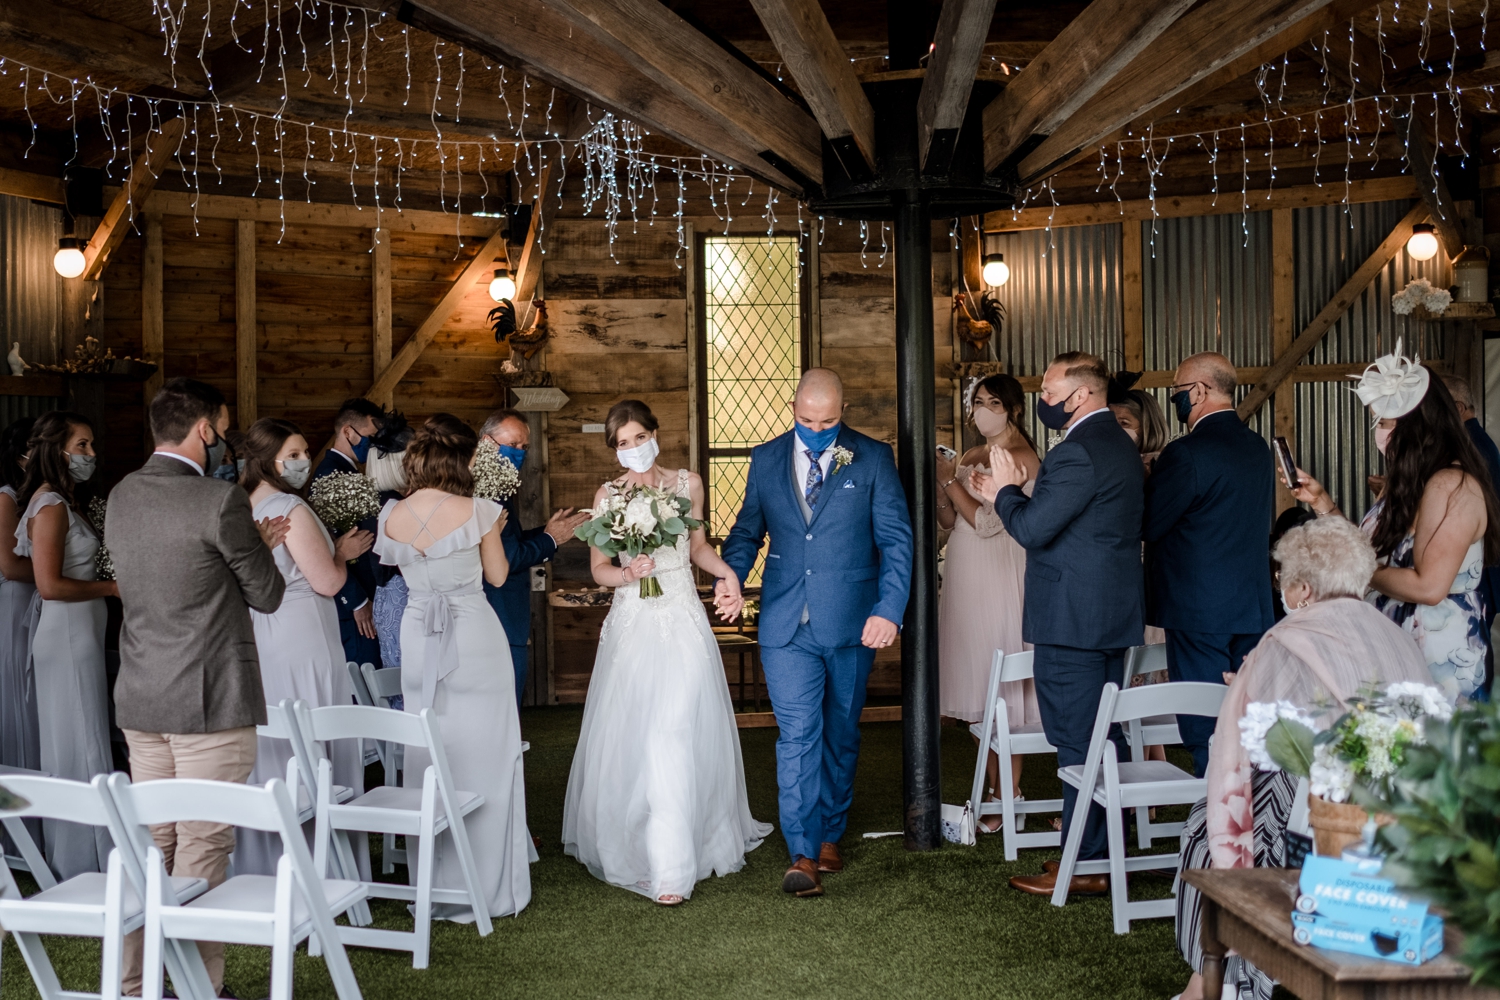 Marriage ceremony at Woodhouse Barn